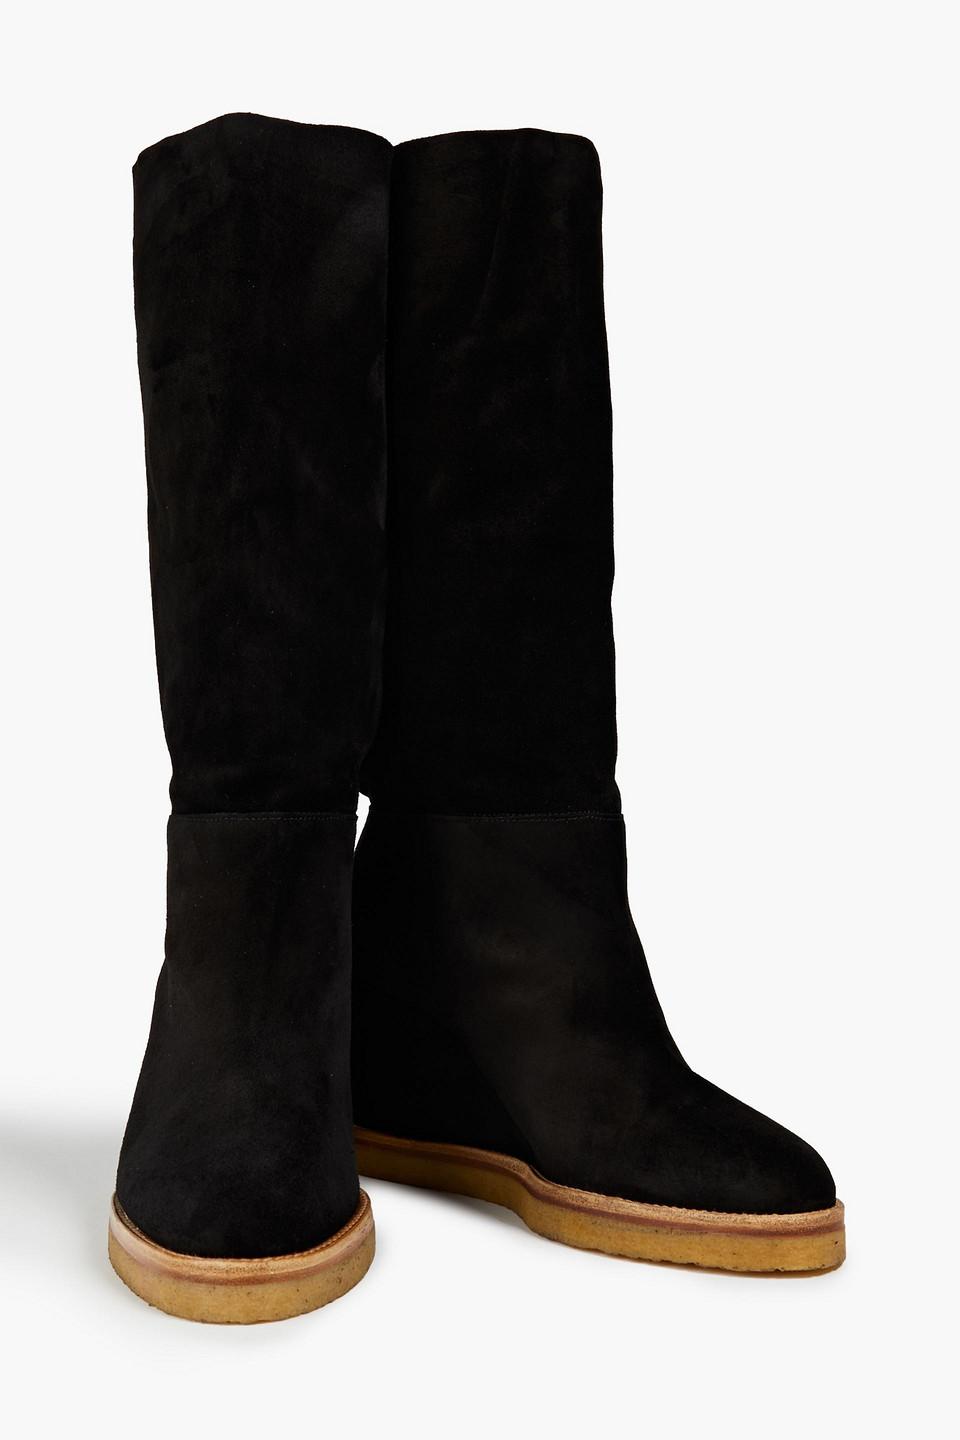 Ba&sh Cassandra Suede Wedge Boots in Black | Lyst